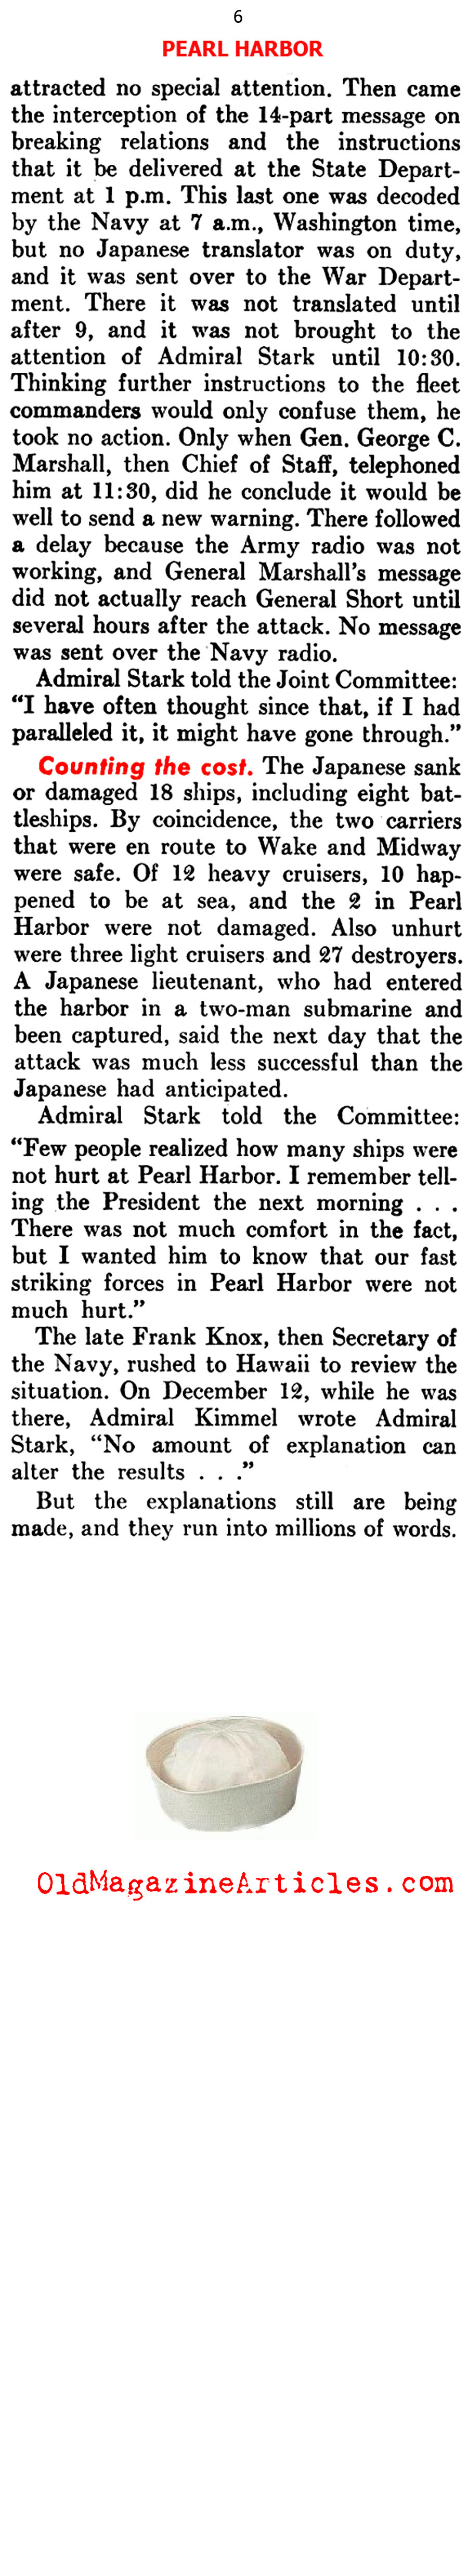 The Congressional Hearings Regarding the Pearl Harbor Attack (United States News, 1945)